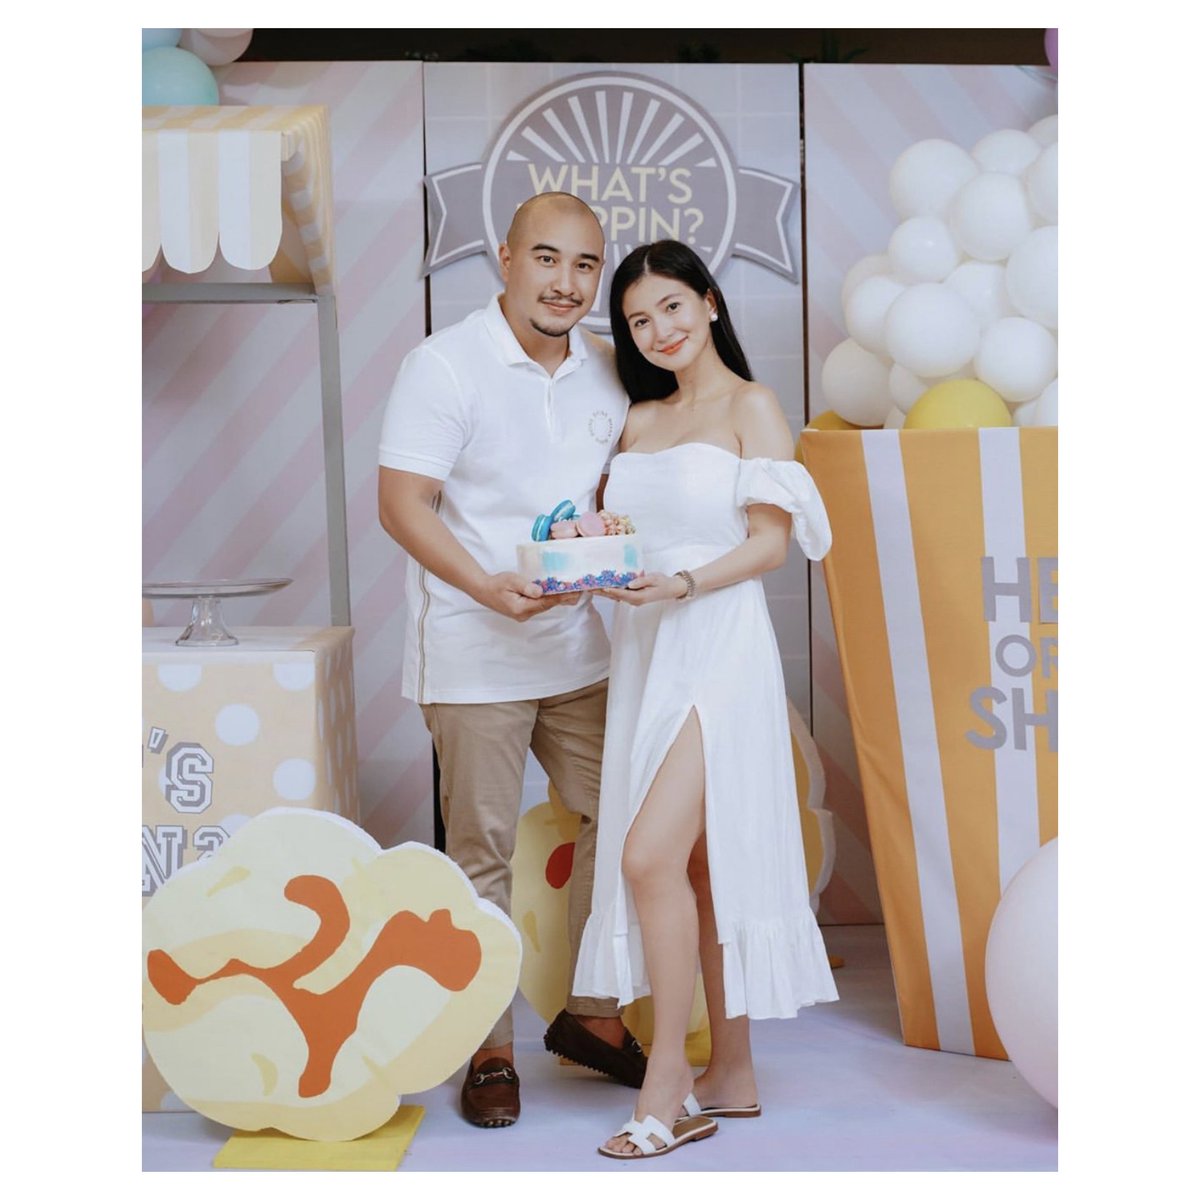 Is it a girl or a boy? ✨ Check out the video to find out and to see the highlights from #SheenaHalili (@mysheenahalili) and husband Jeron Manzanero's gender reveal party! ❤➡️ youtu.be/pTiMhVgCqjk